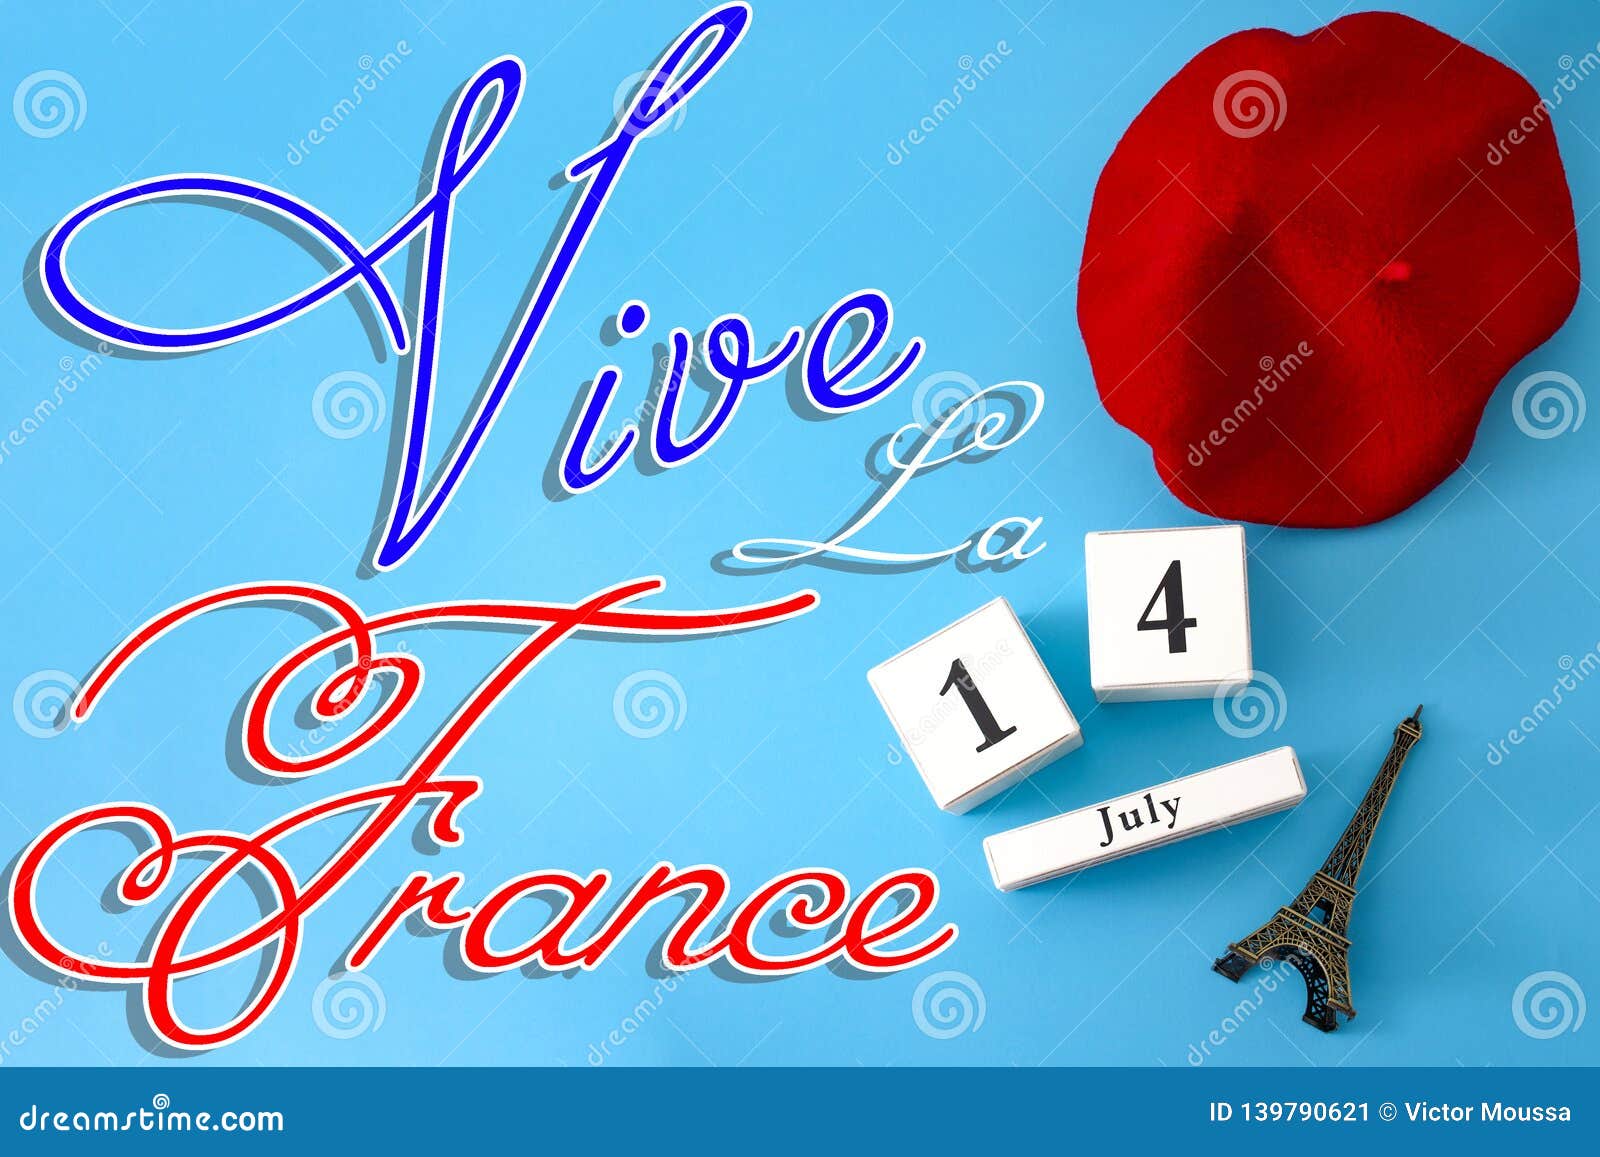 happy bastille day, long live france and french national day concept with a flat lay image of red beret, a block calendar set on